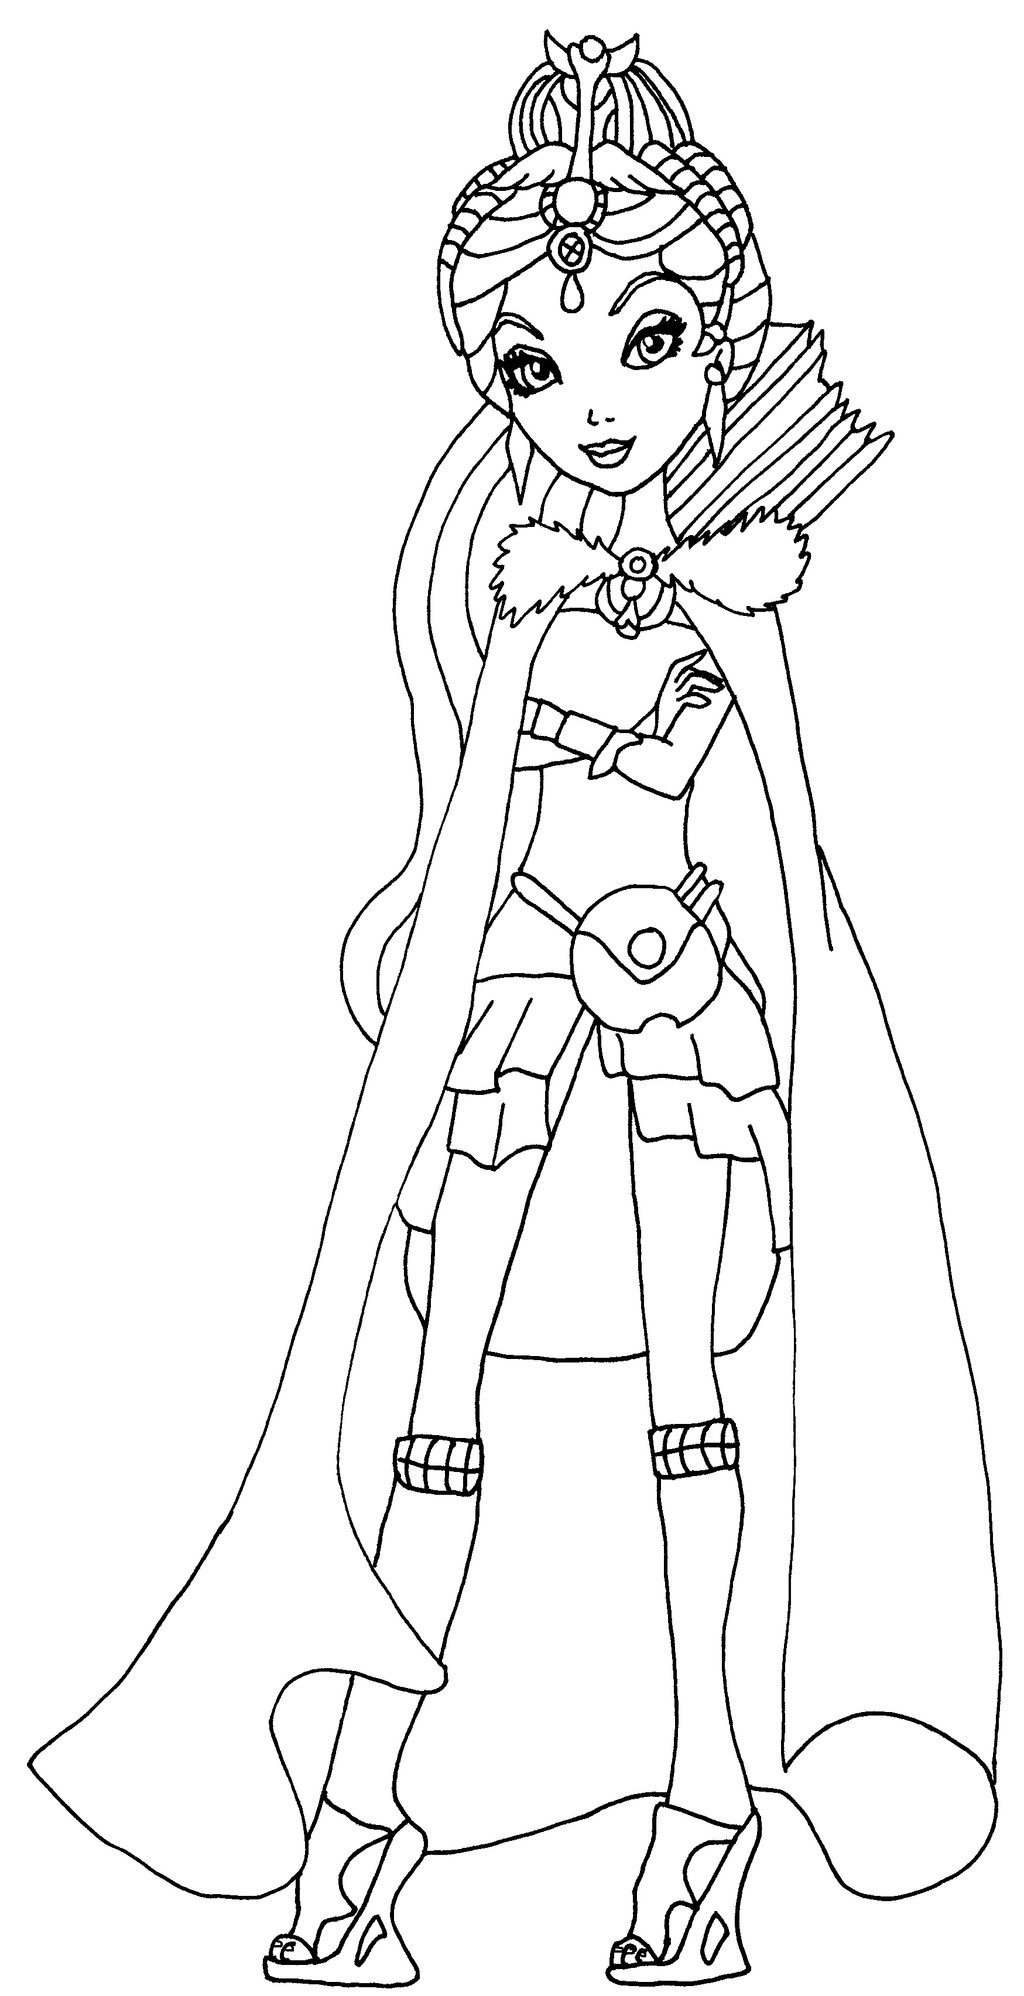 Coloring Sheet Free Printable
 Ever After High free coloring pages images to print